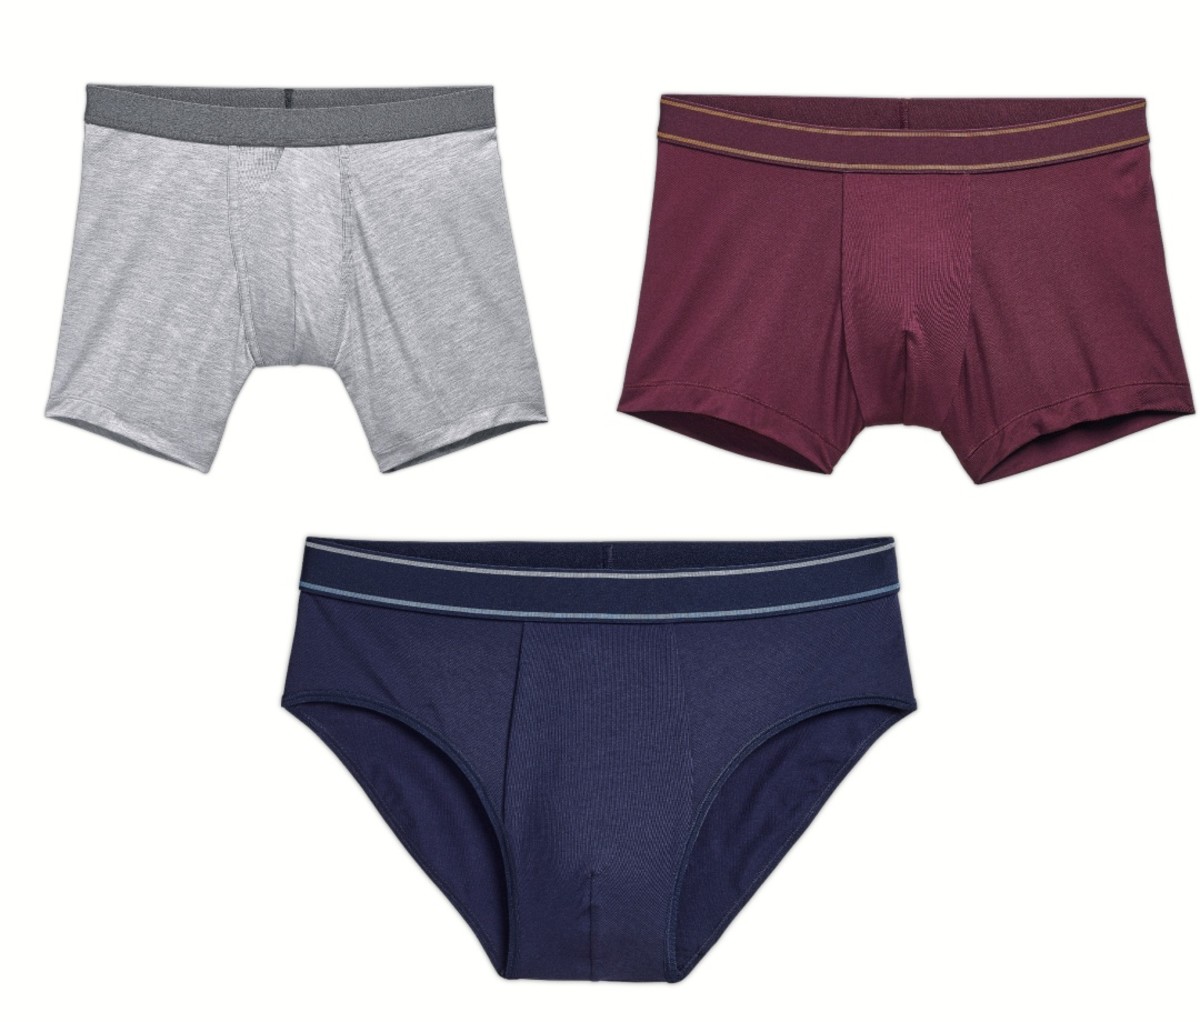 Bombas Introduces Underwear to Its Lineup